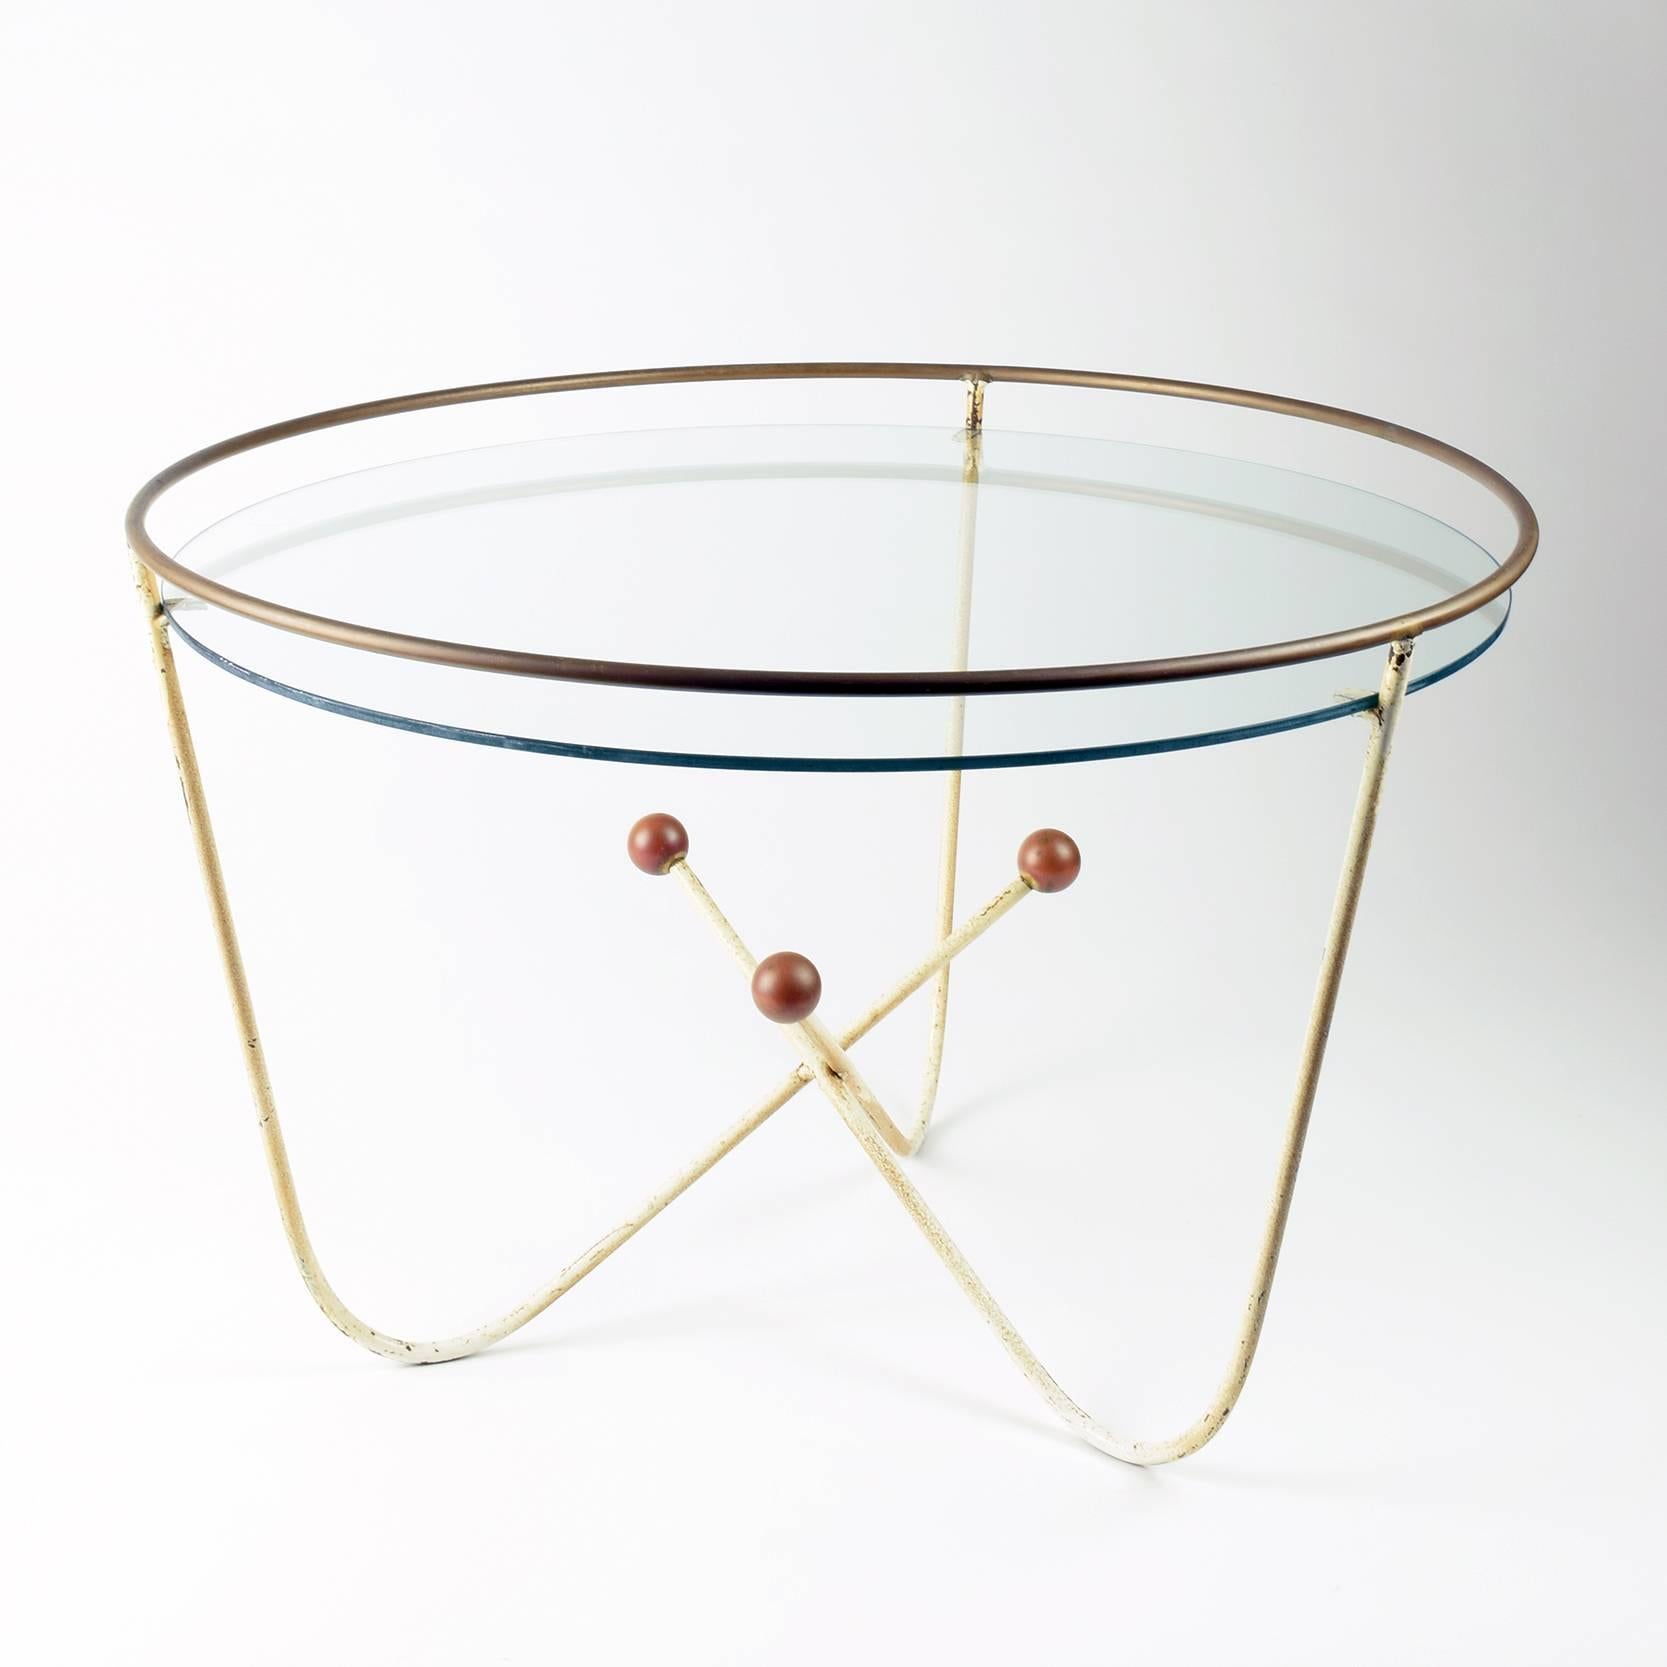 Edward Ihnatowicz, coffee/side table for Mars Furniture, retailed by Heals, 1950s.

This pretty little Mid-Century, 1950s low table is typical of the 1951 festival of Britain style championed by British designers such as Ernest Race.

Painted metal